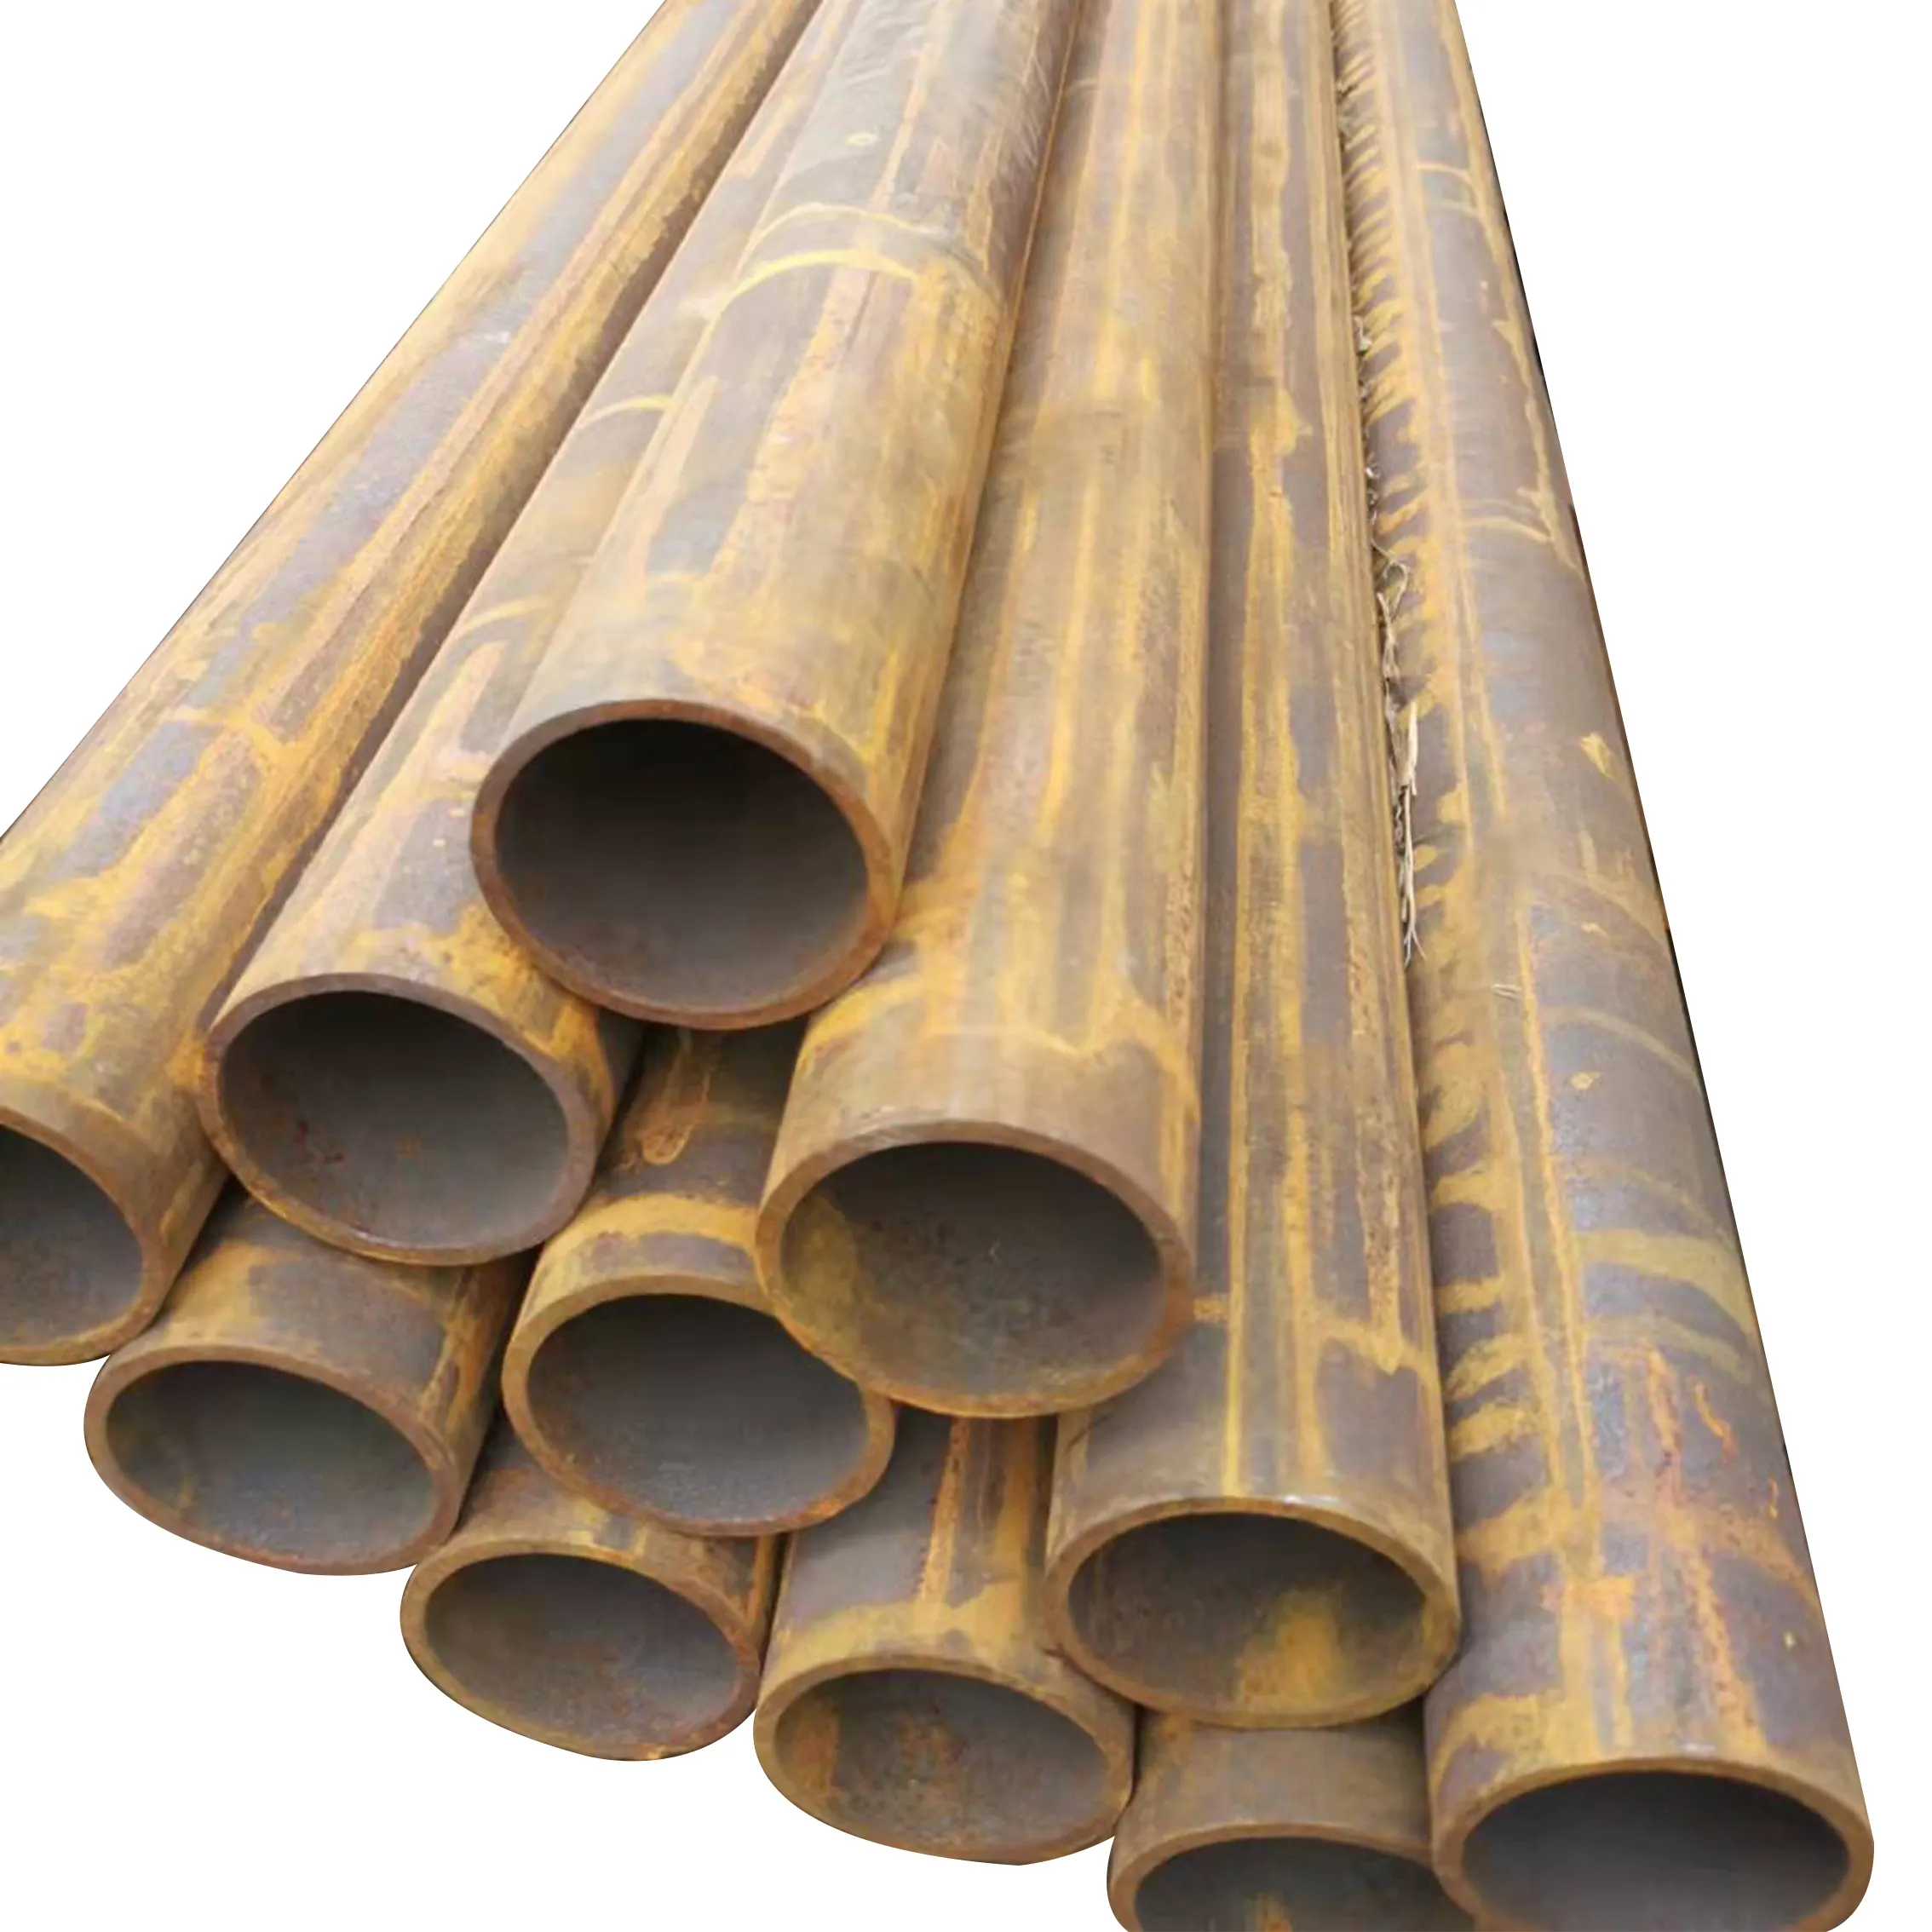 ASTM A106 sae 1040 CARBON STEEL PIPE Price/API 5L gr.b LSAW, SSAW Seamless Carbon Pipe